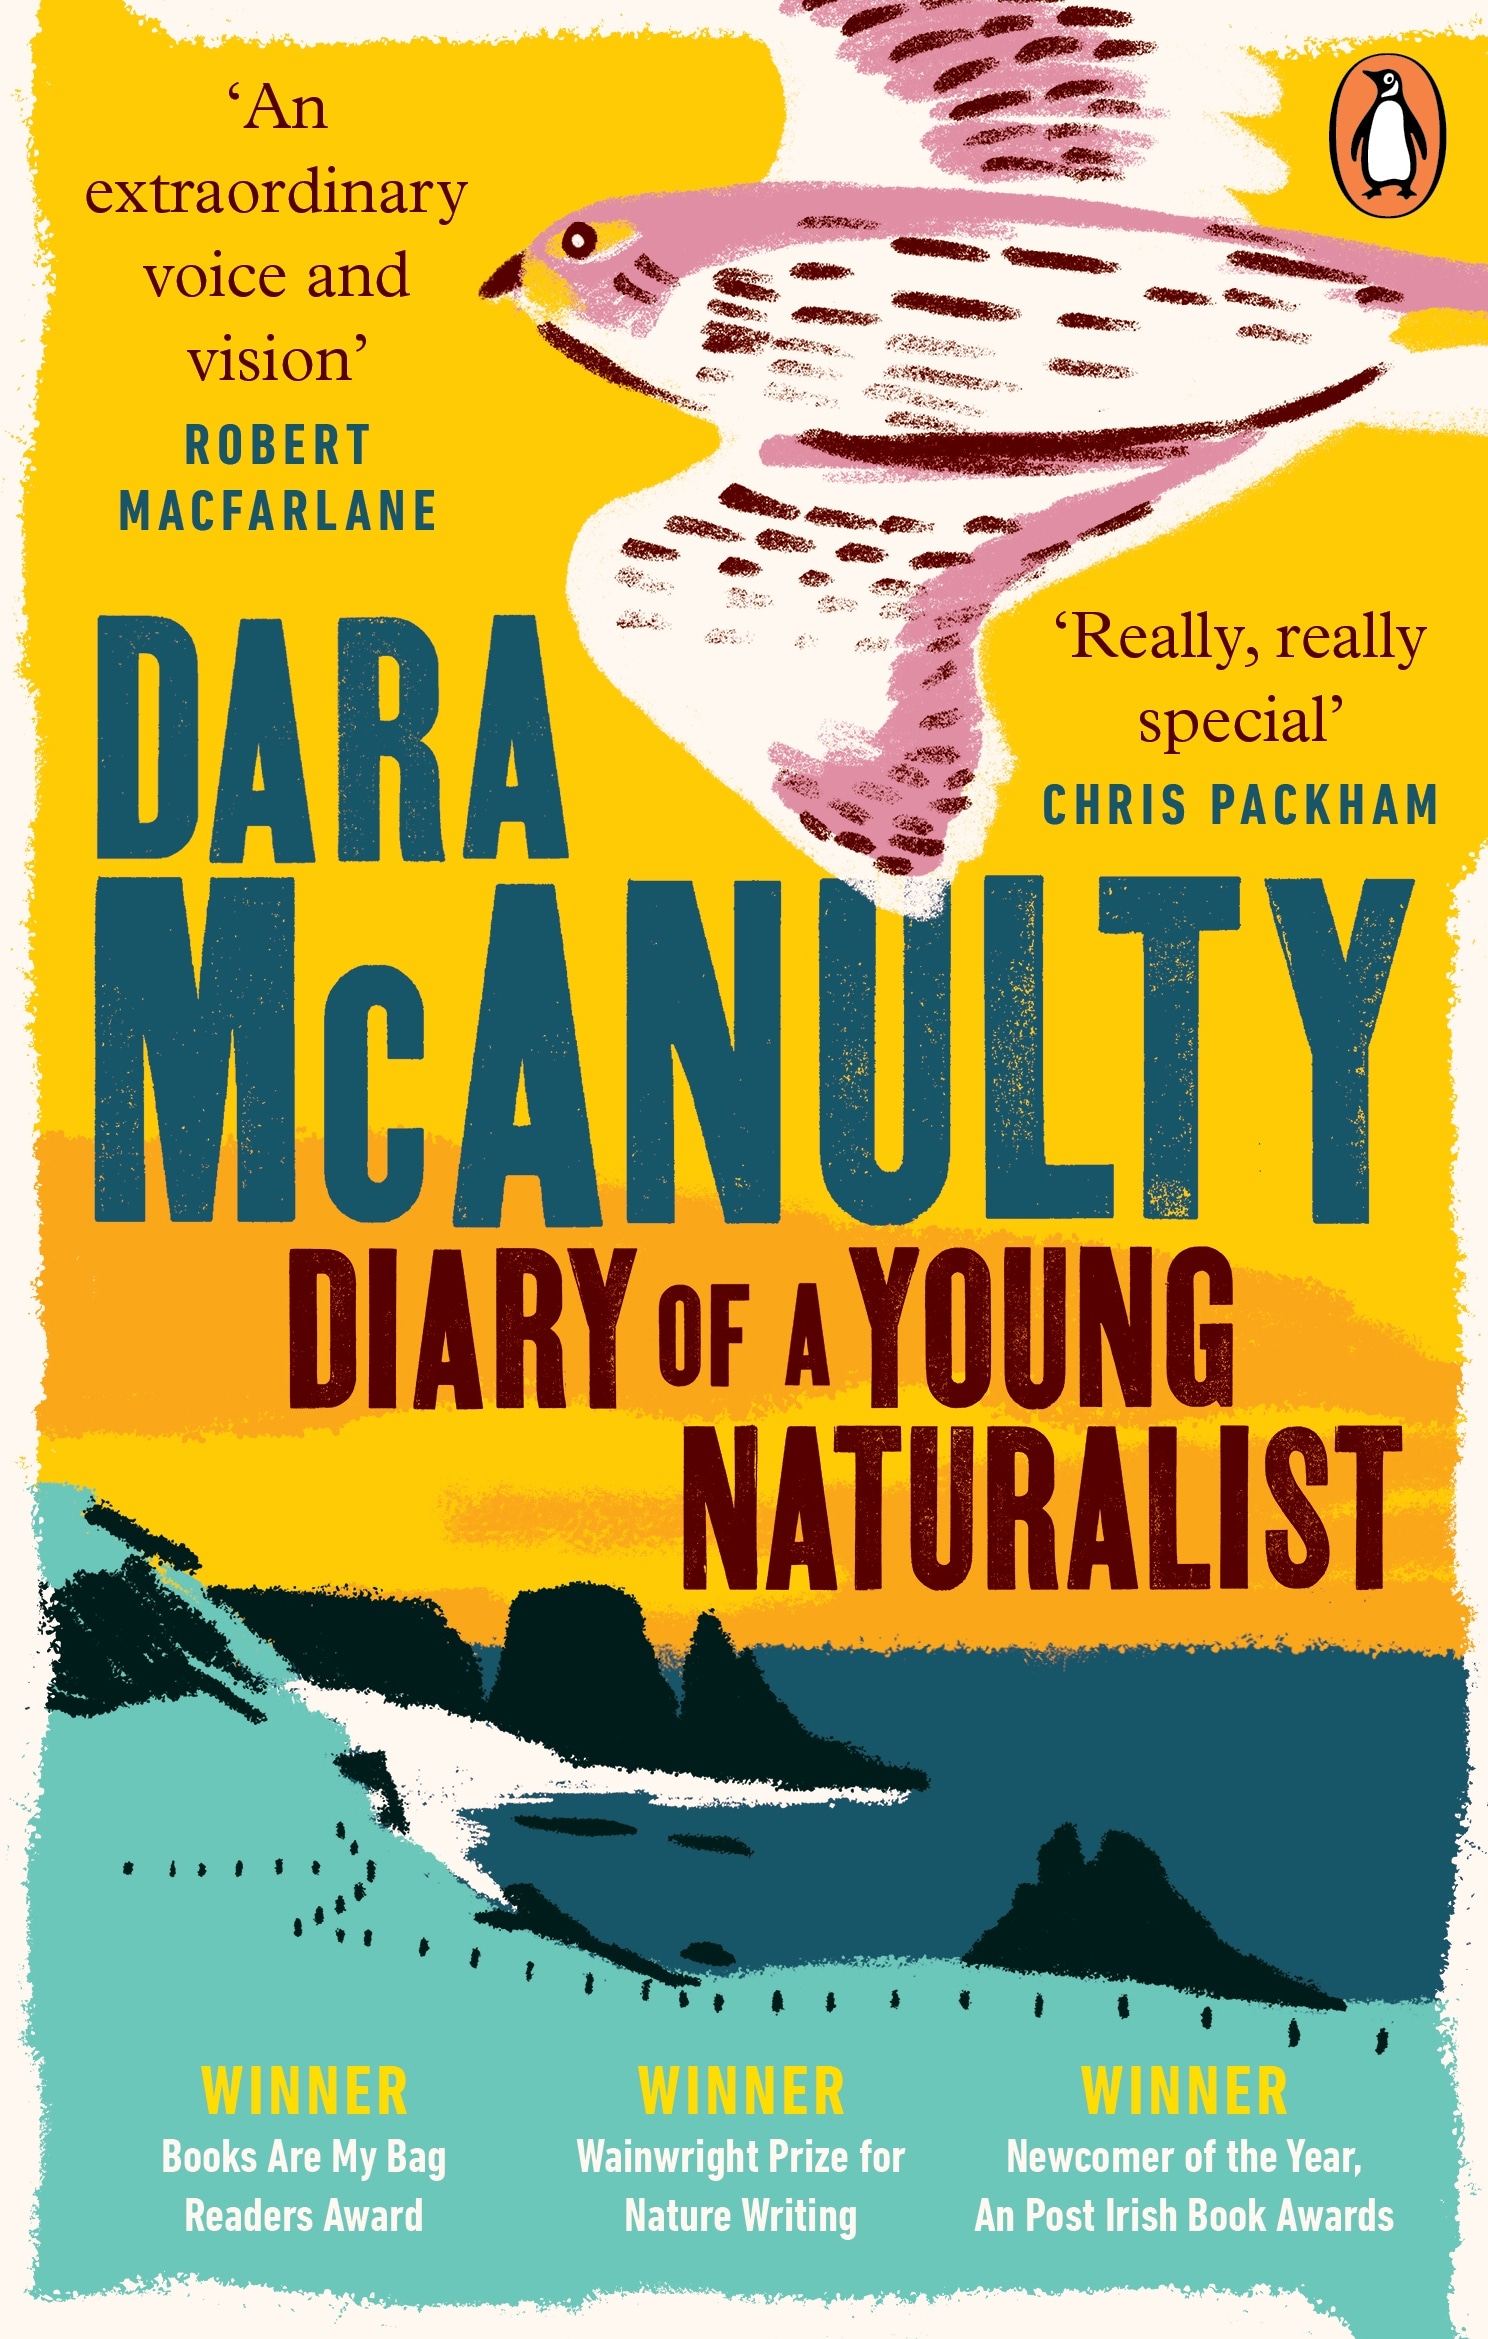 Book “Diary of a Young Naturalist” by Dara McAnulty — April 29, 2021